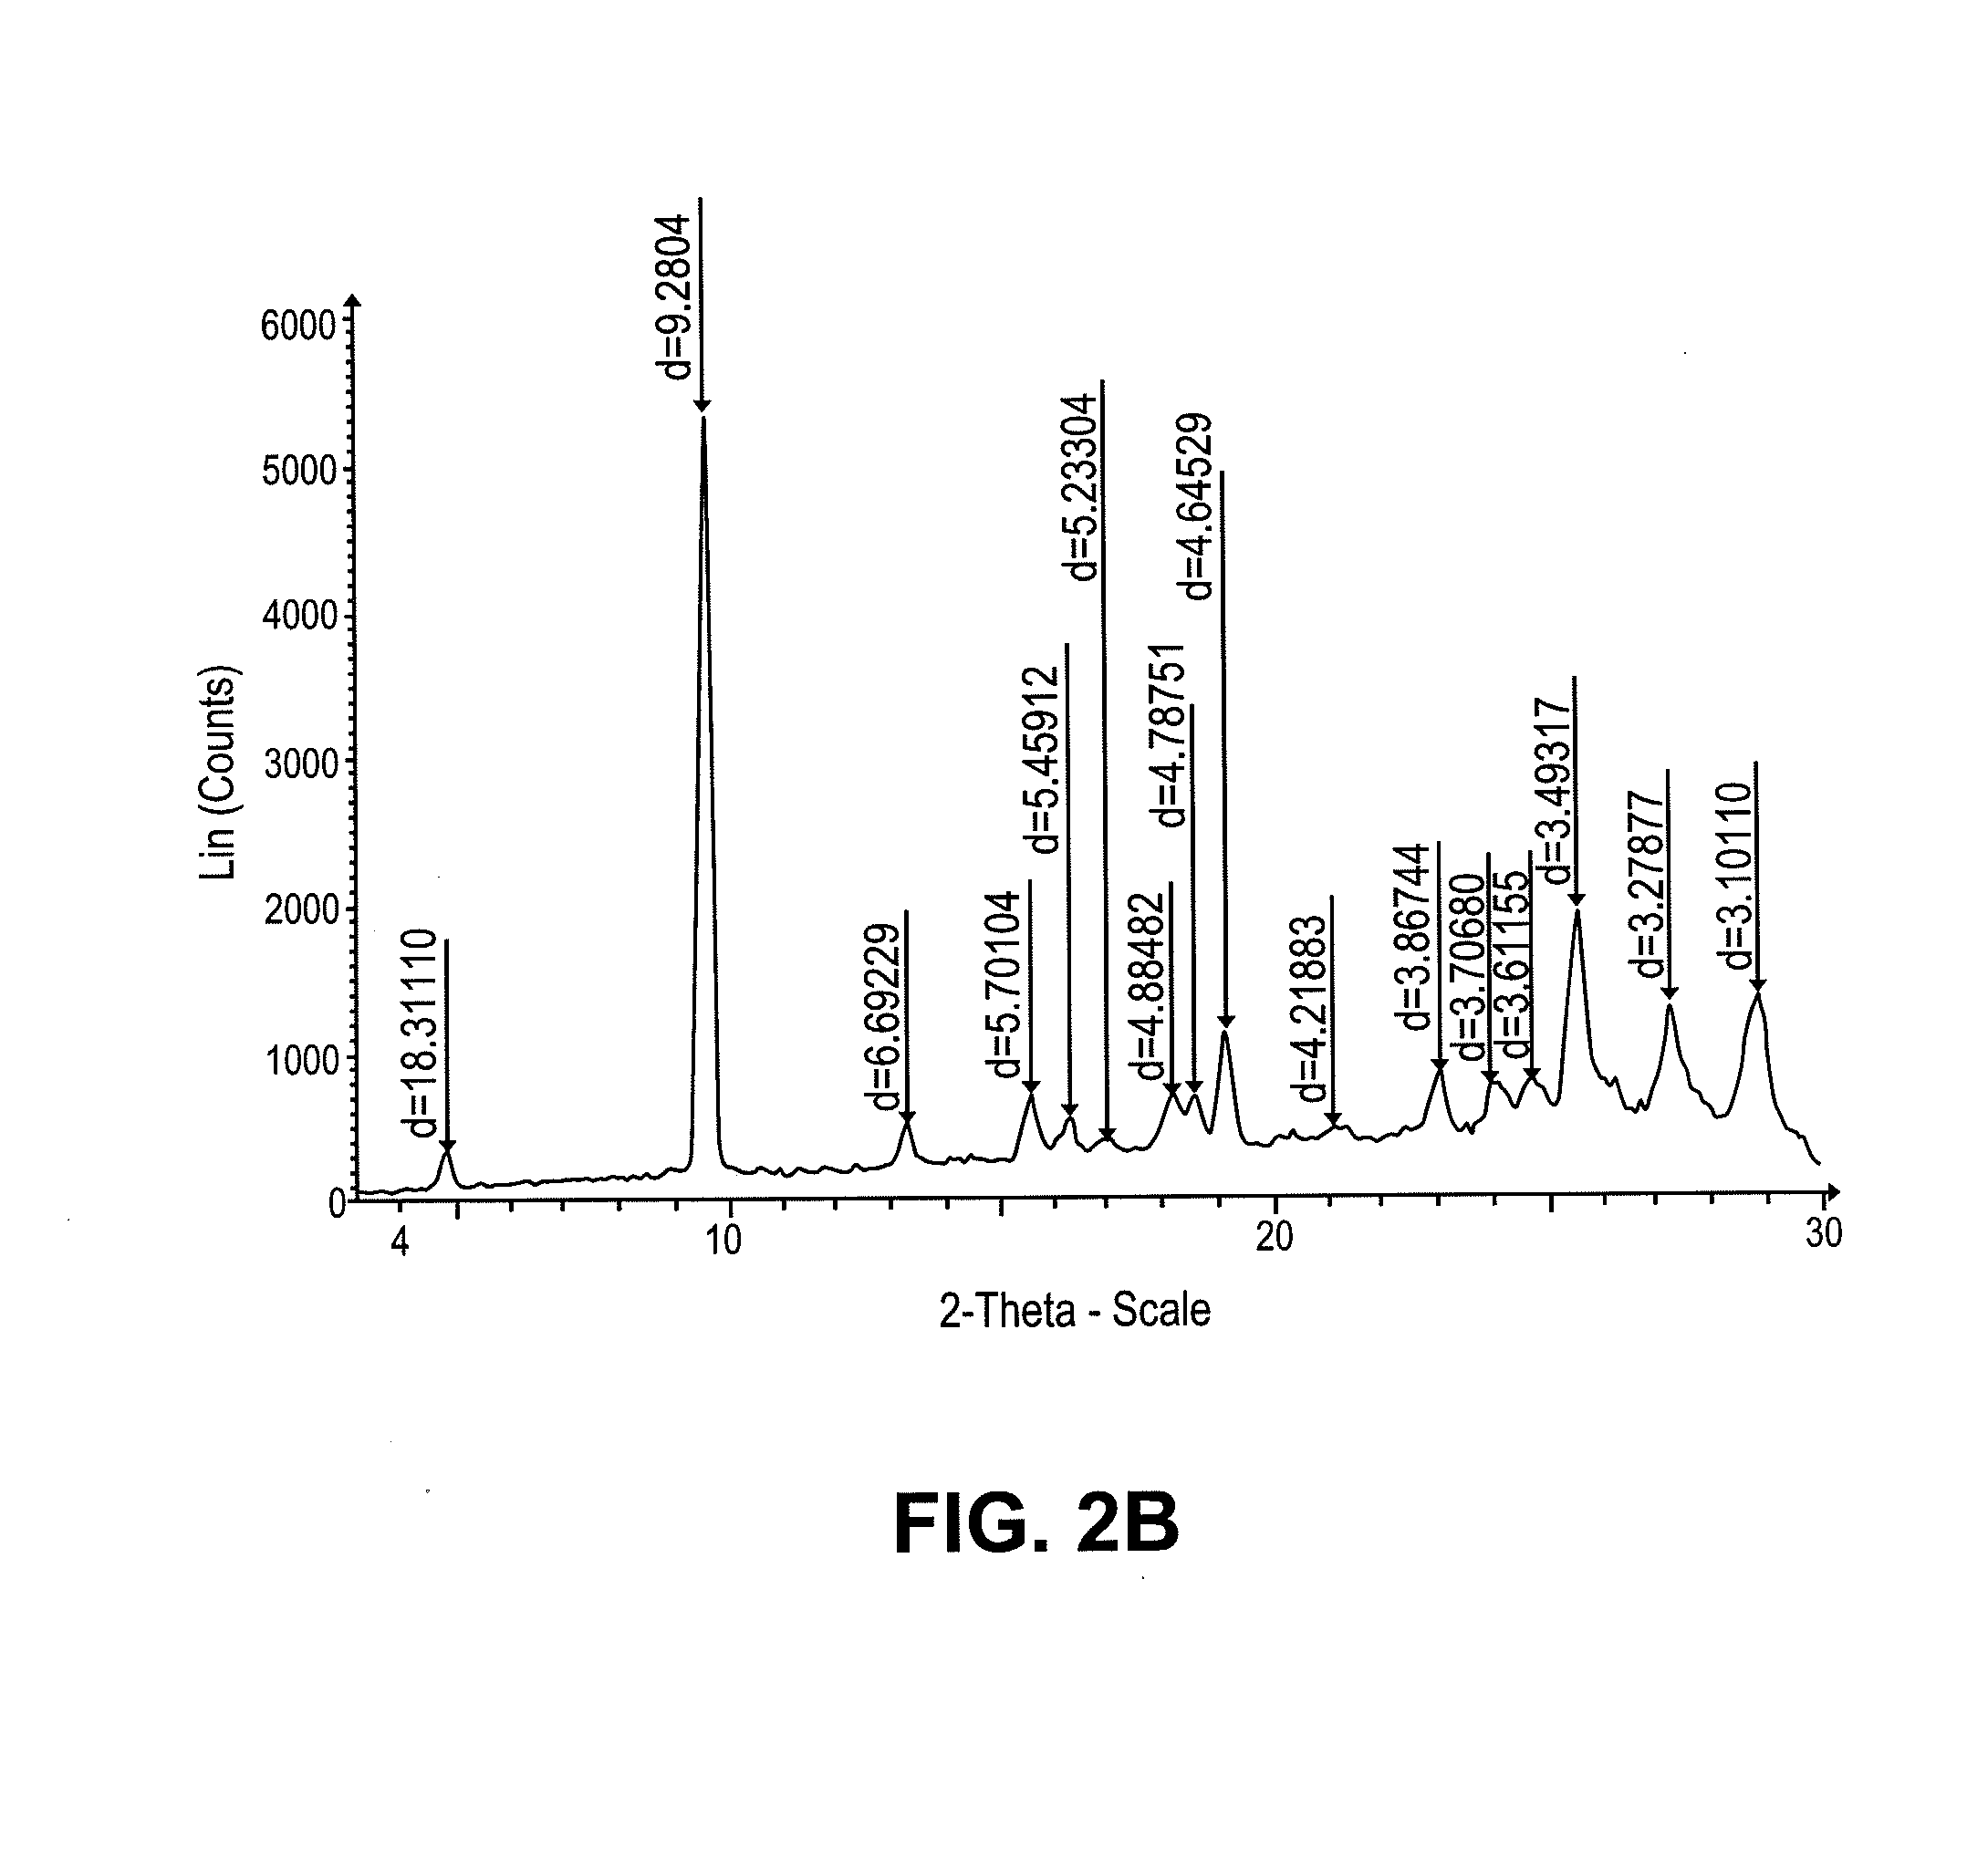 Intravenous and oral dosing of a direct-acting and reversible p2y12 inhibitor